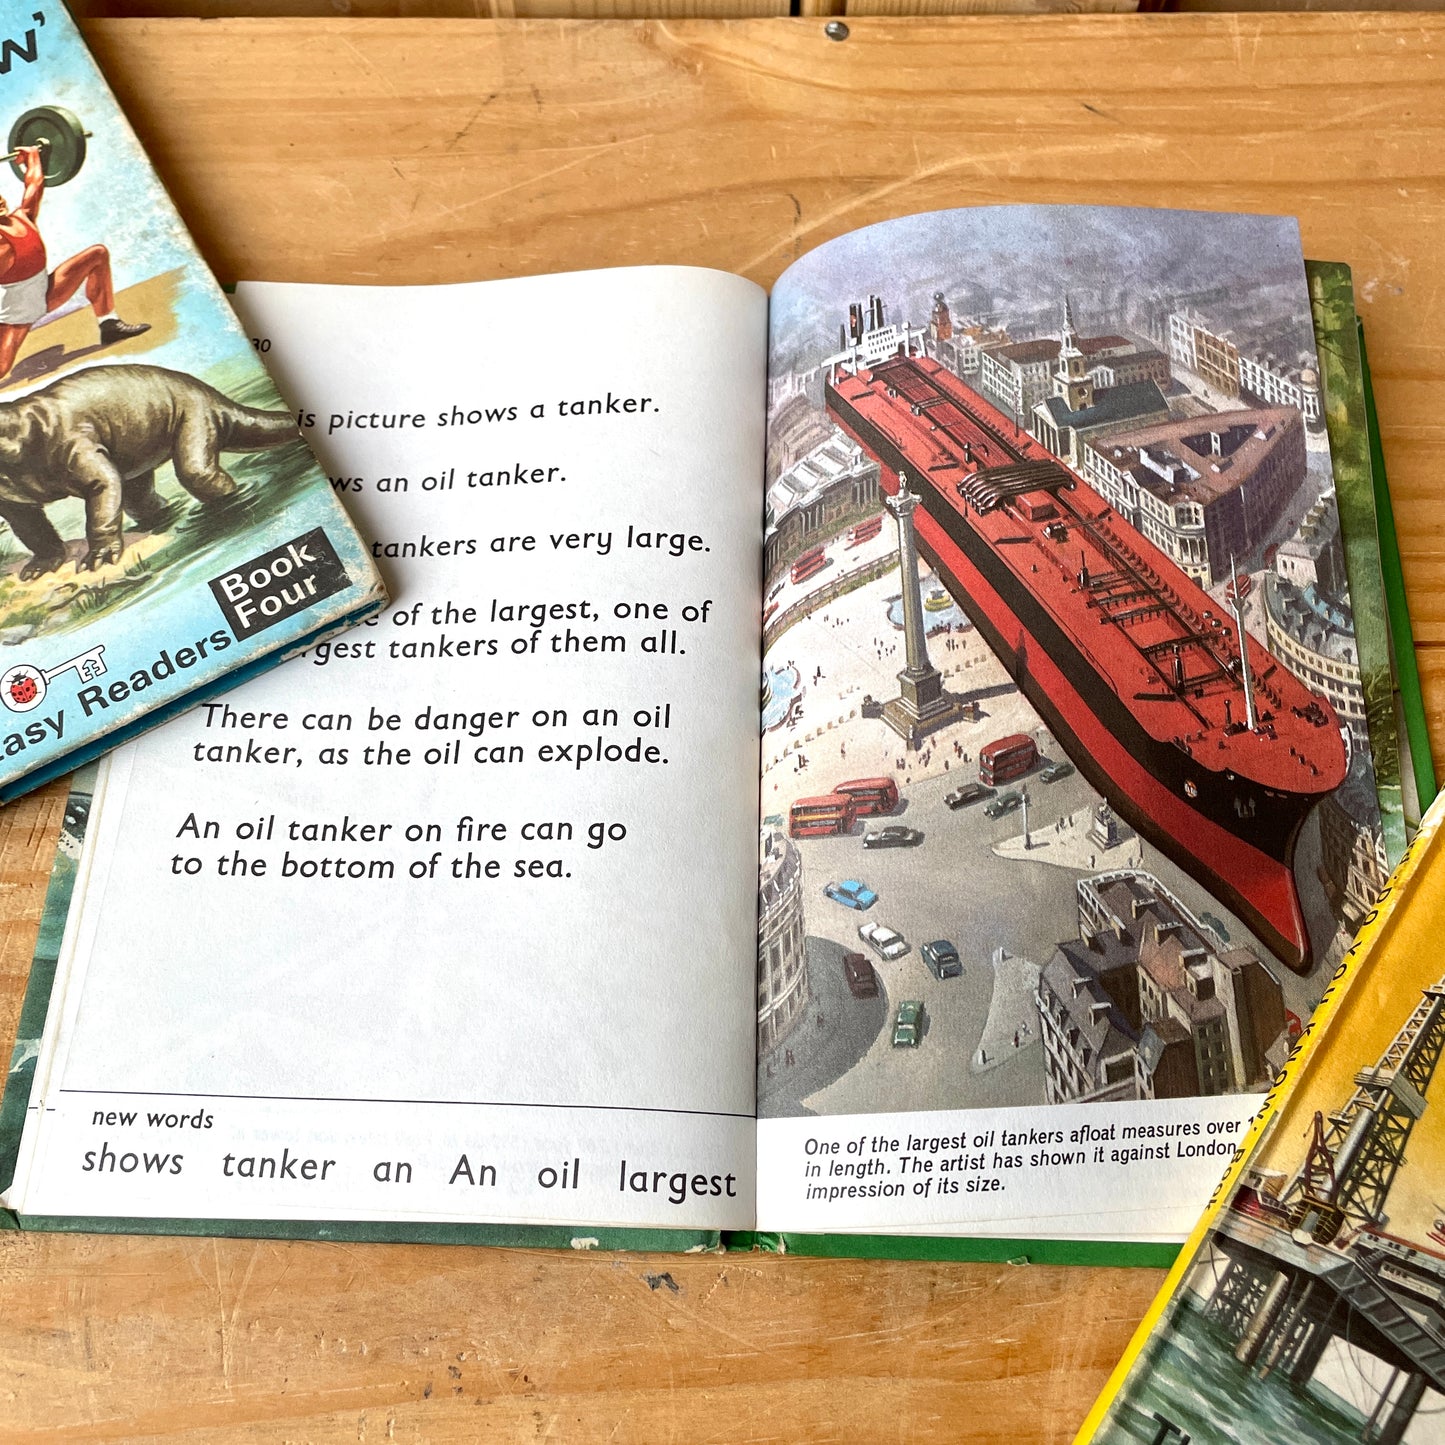 Ladybird books series Key Words book 3, 4 and 5 "Do You Know"